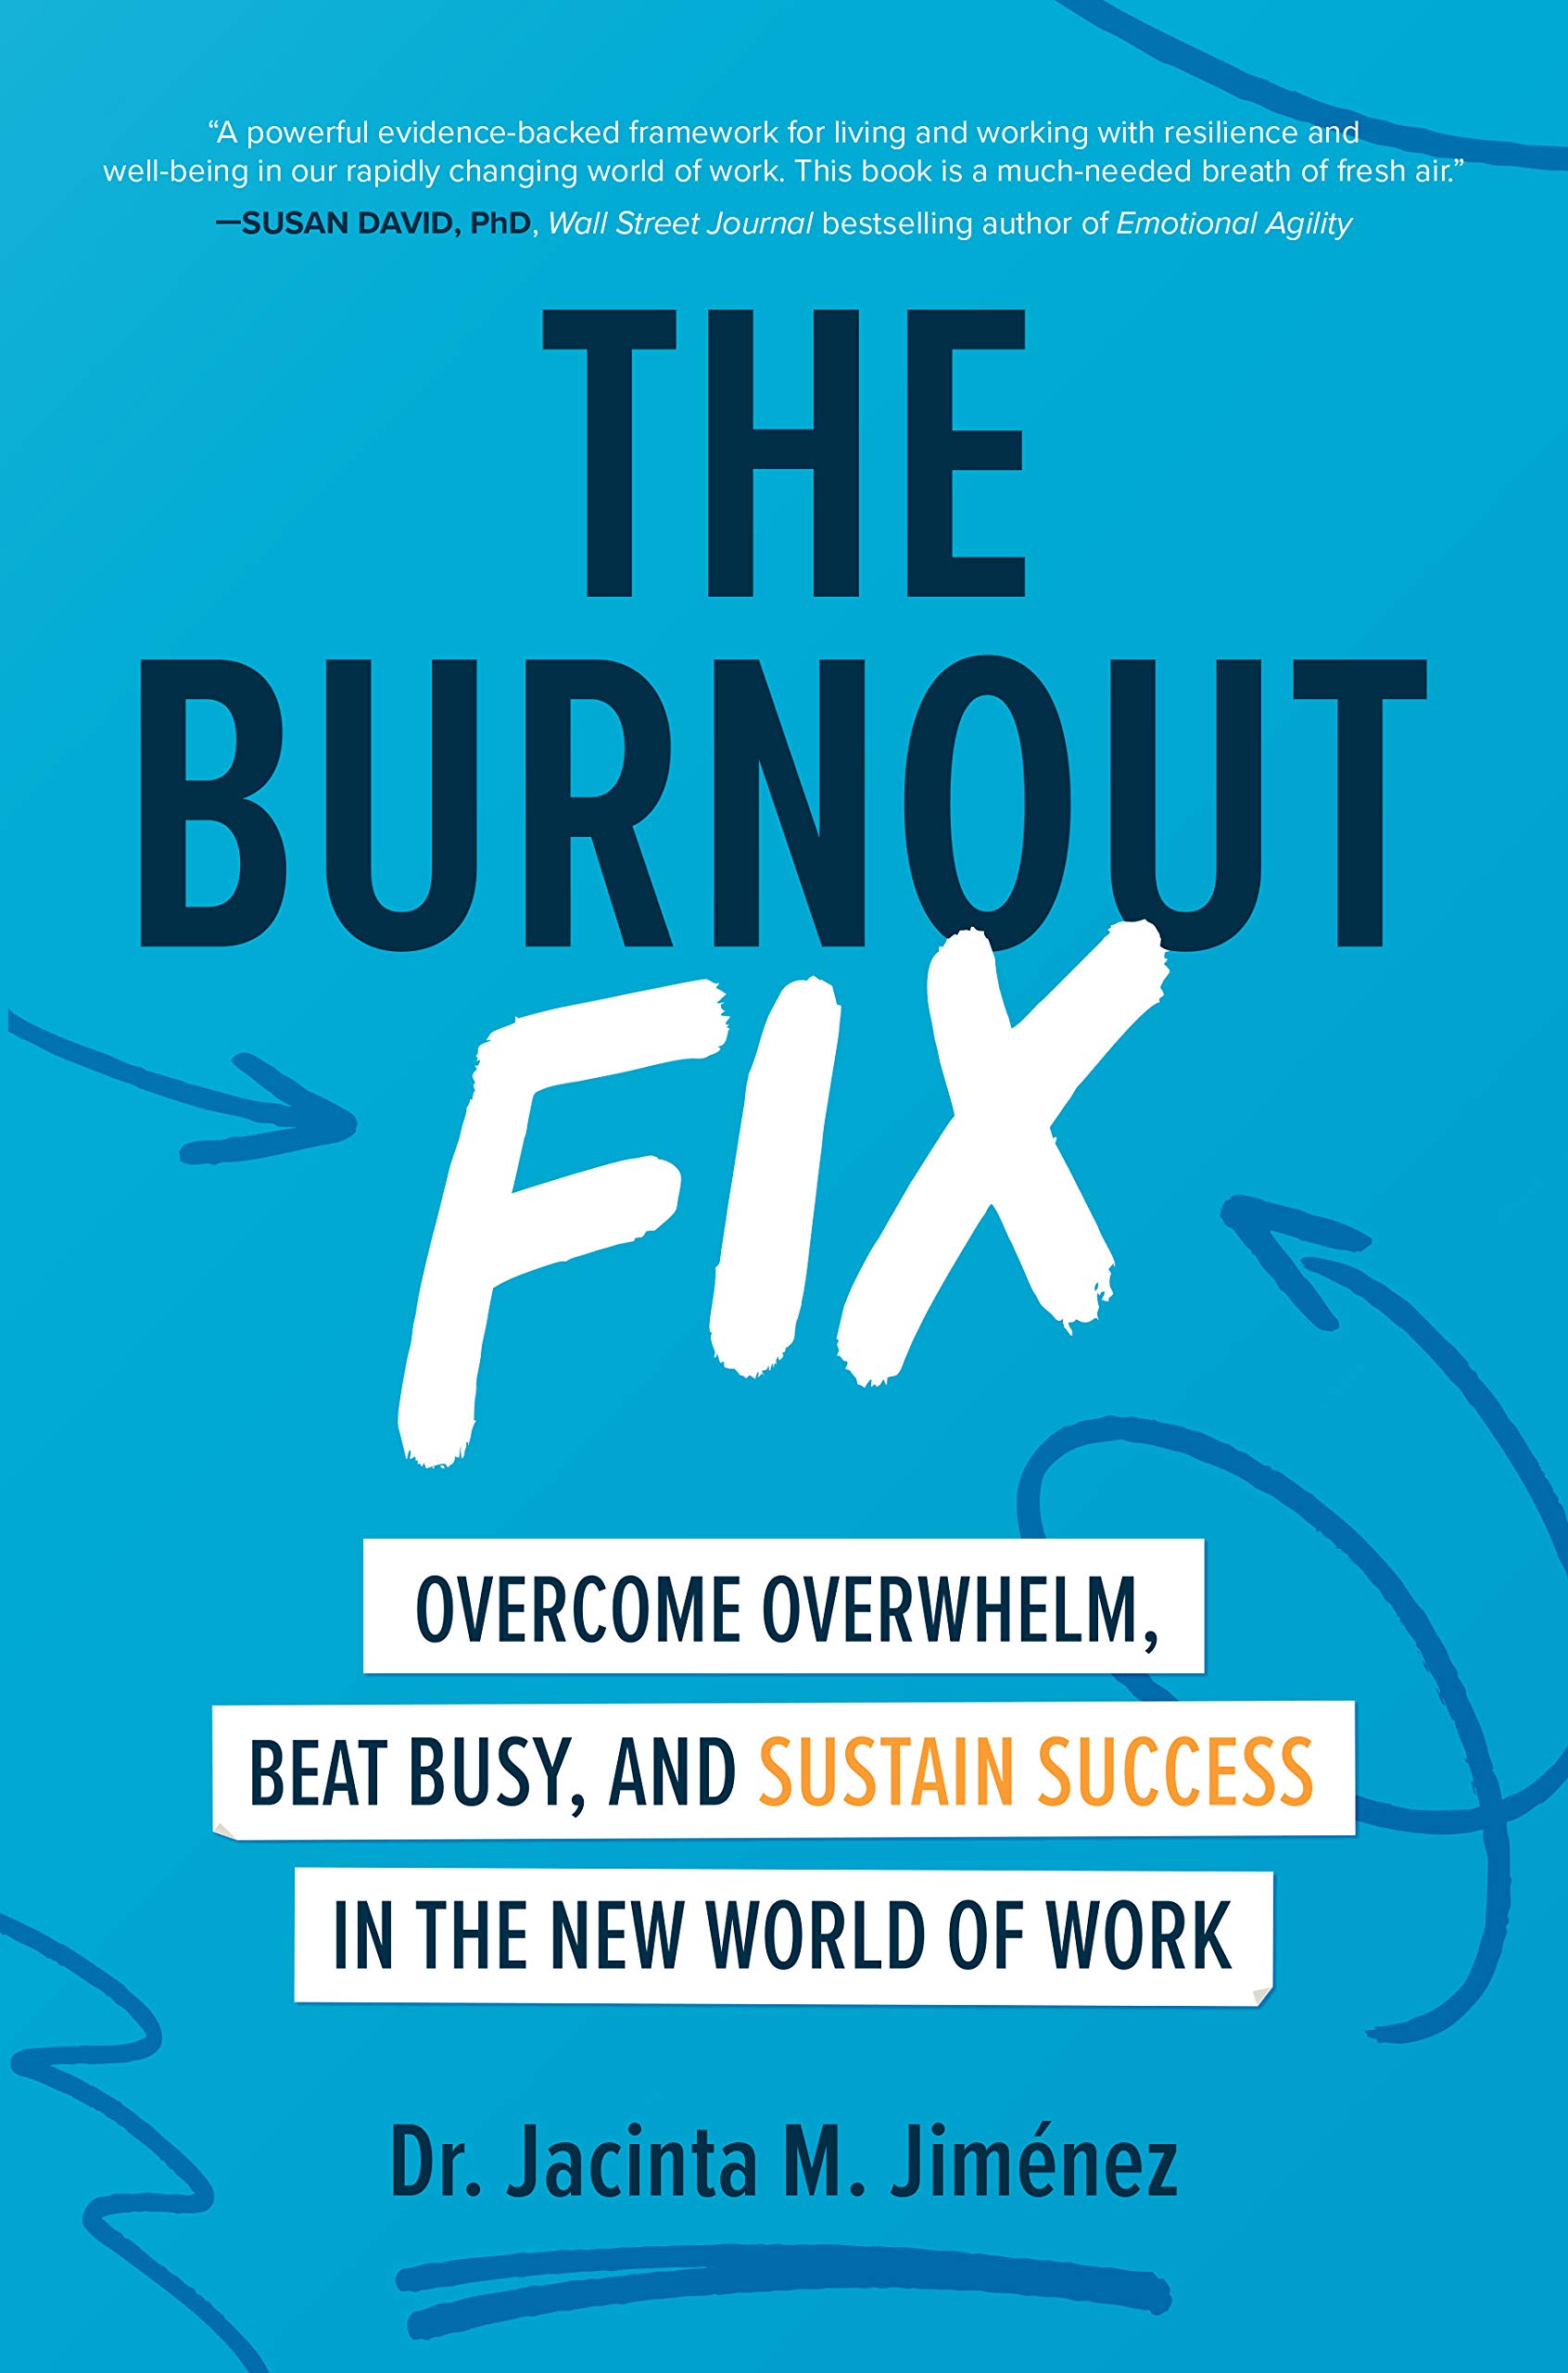 The Burnout Fix: Overcome Overwhelm, Beat Busy, and Sustain Success in the New World of Work by Jacinta M. Jiménez